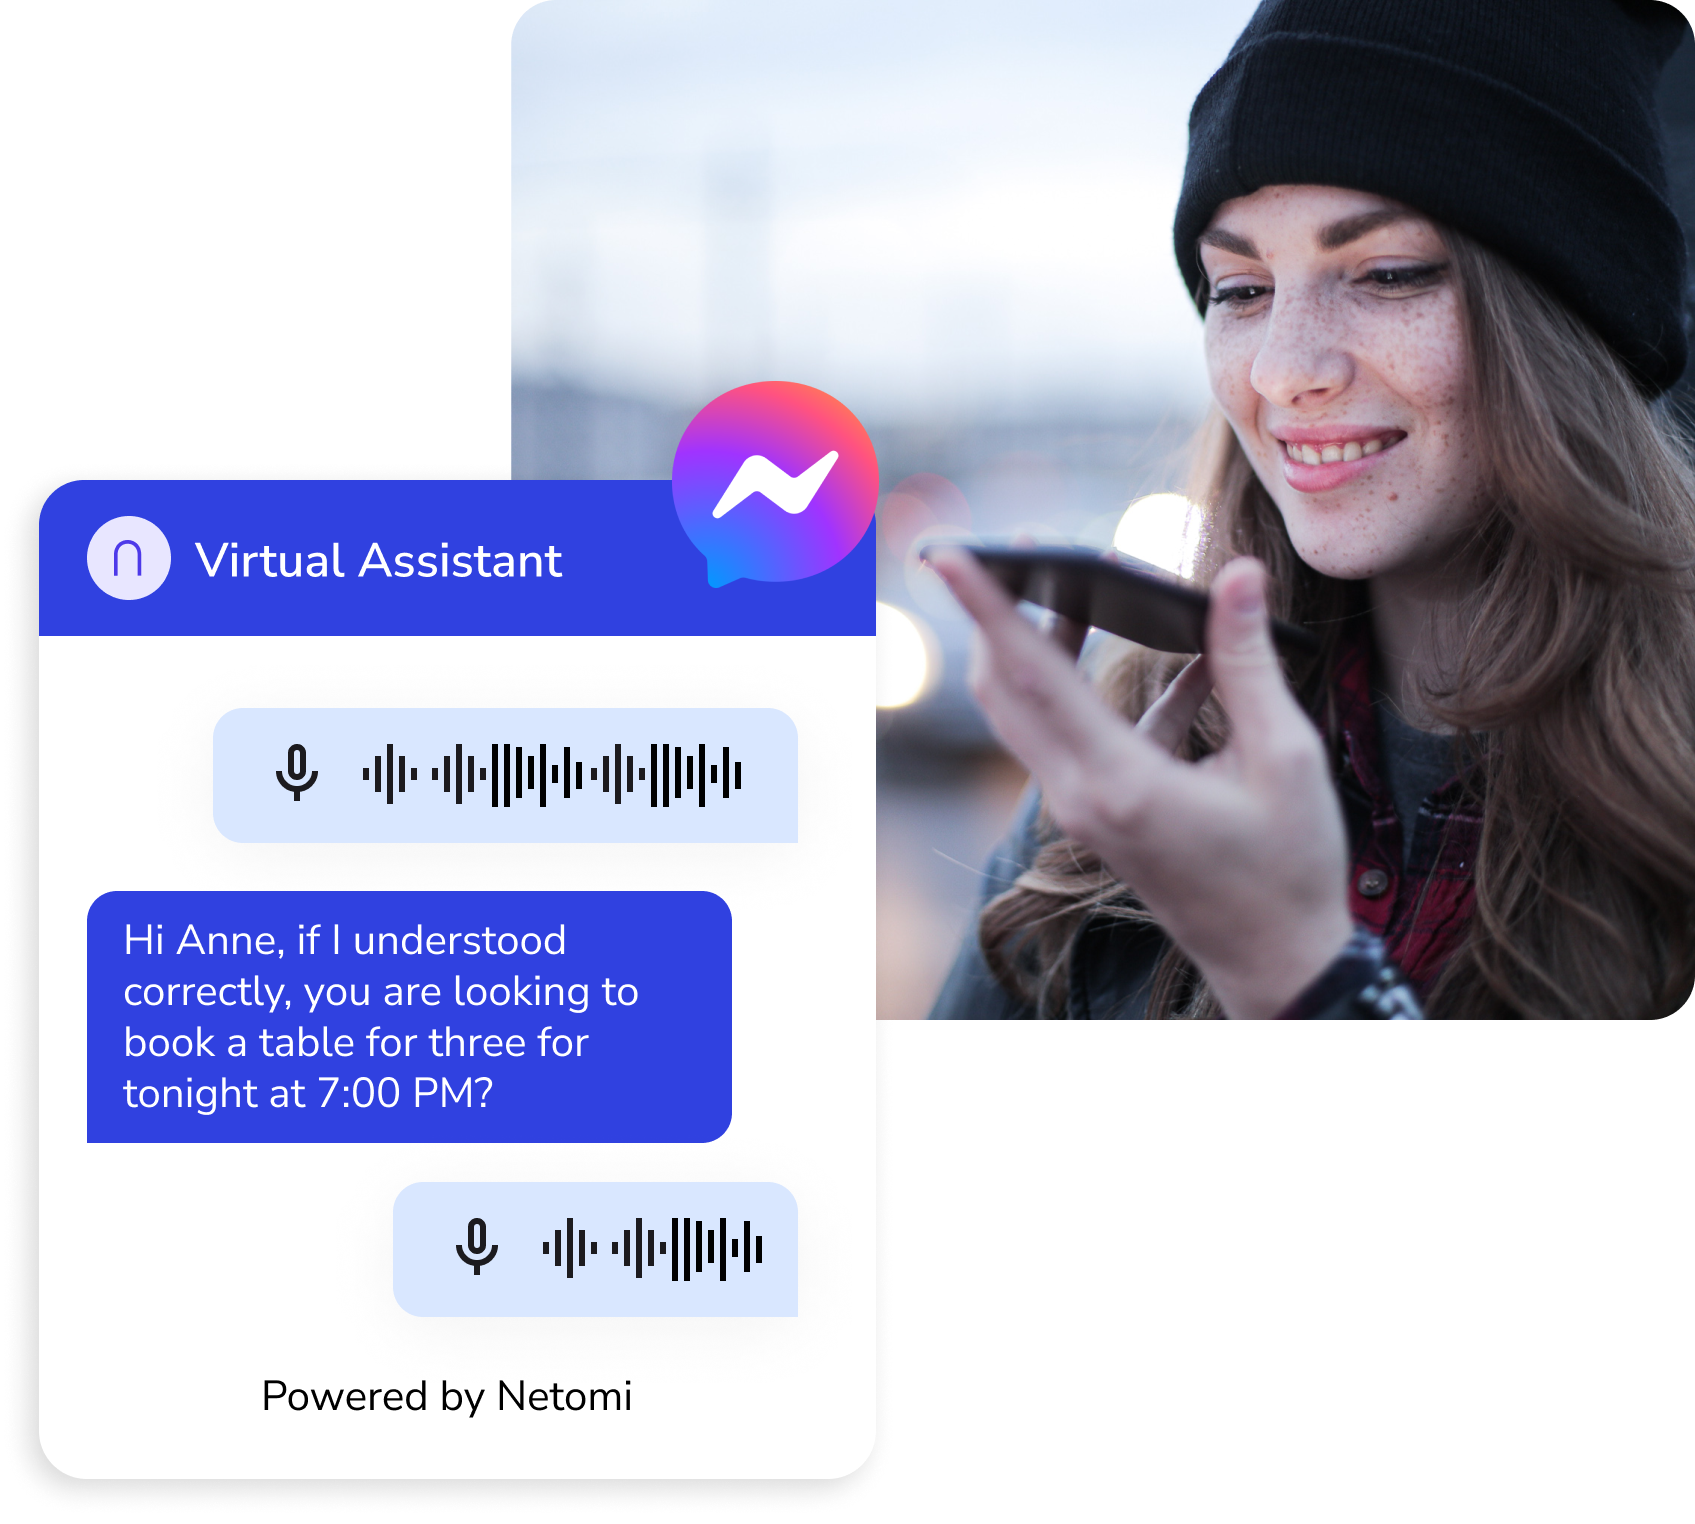 AI Customer Service integrated with voice functionality